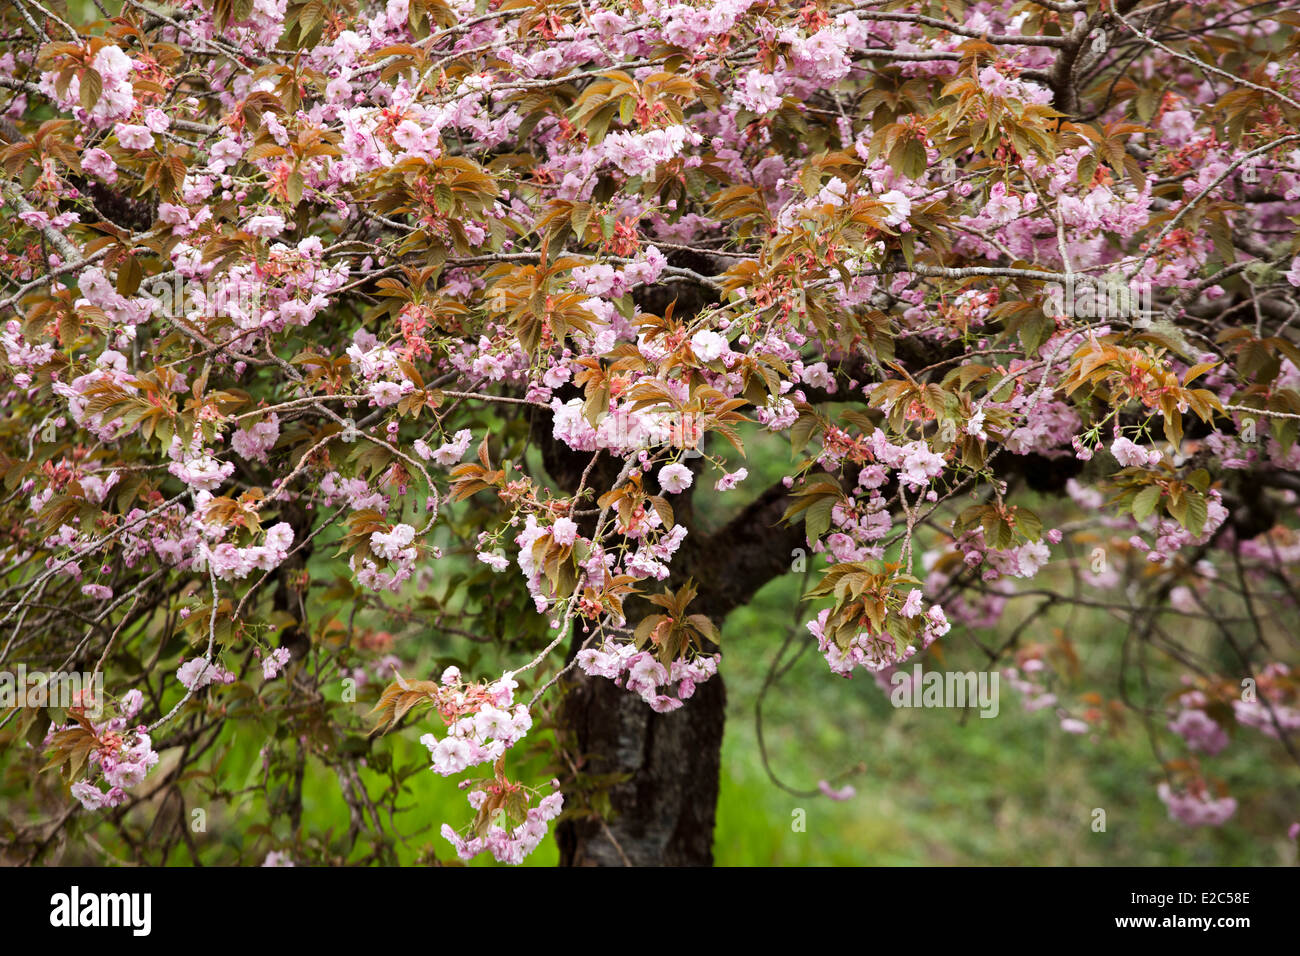 Close up of a Cherry Blossom tree in bloom Stock Photo